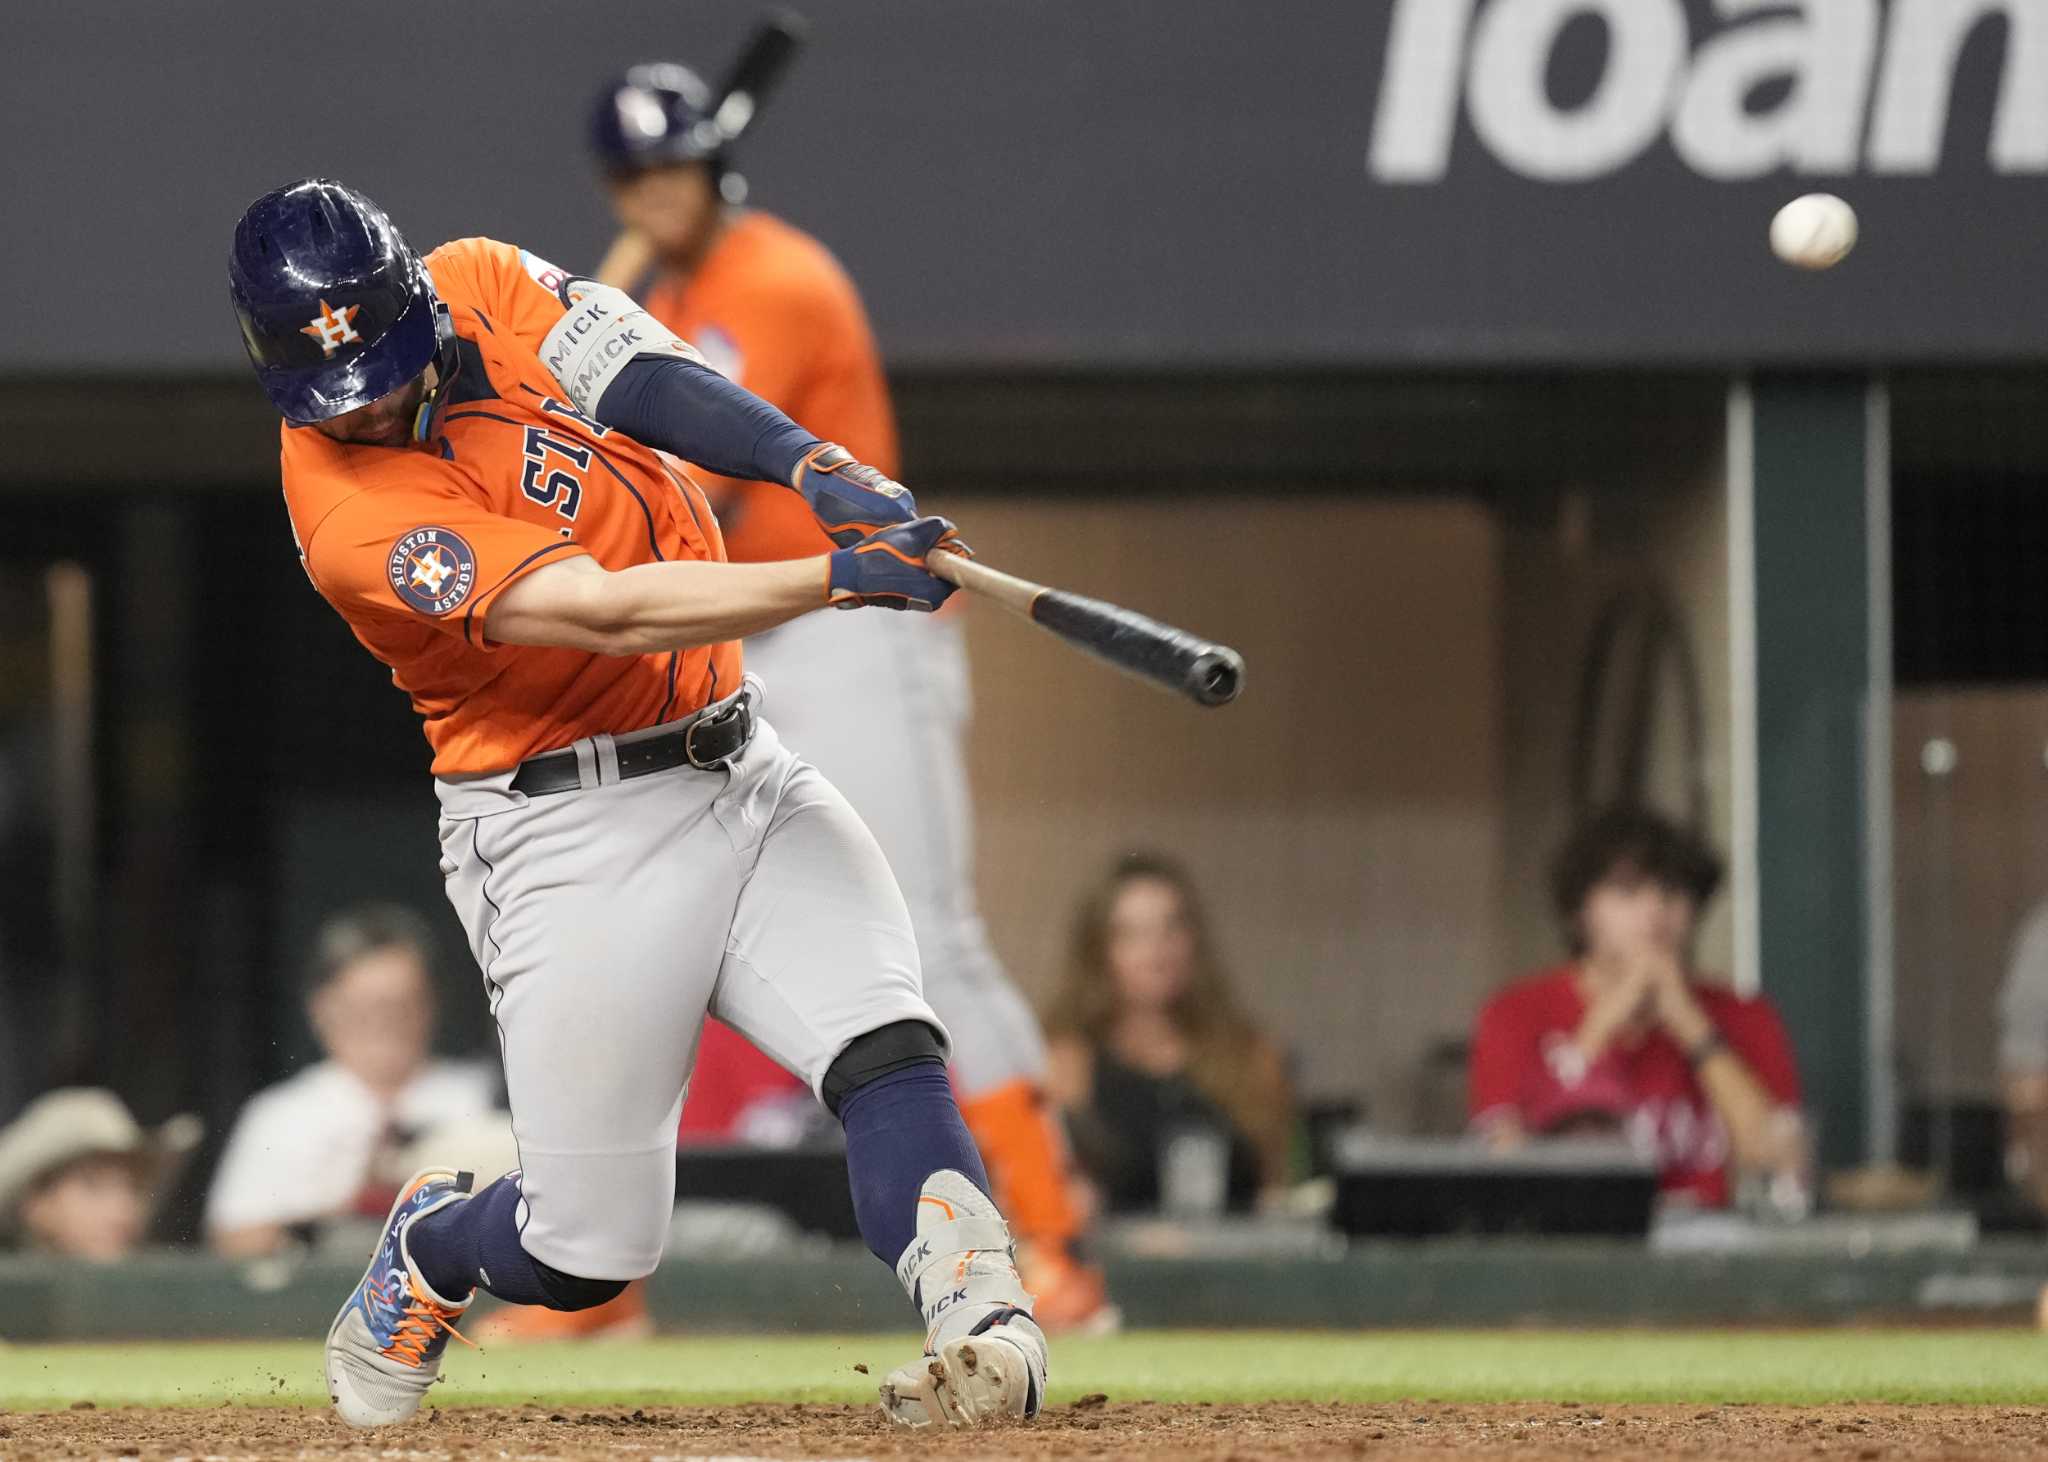 On deck: Astros at Texas Rangers